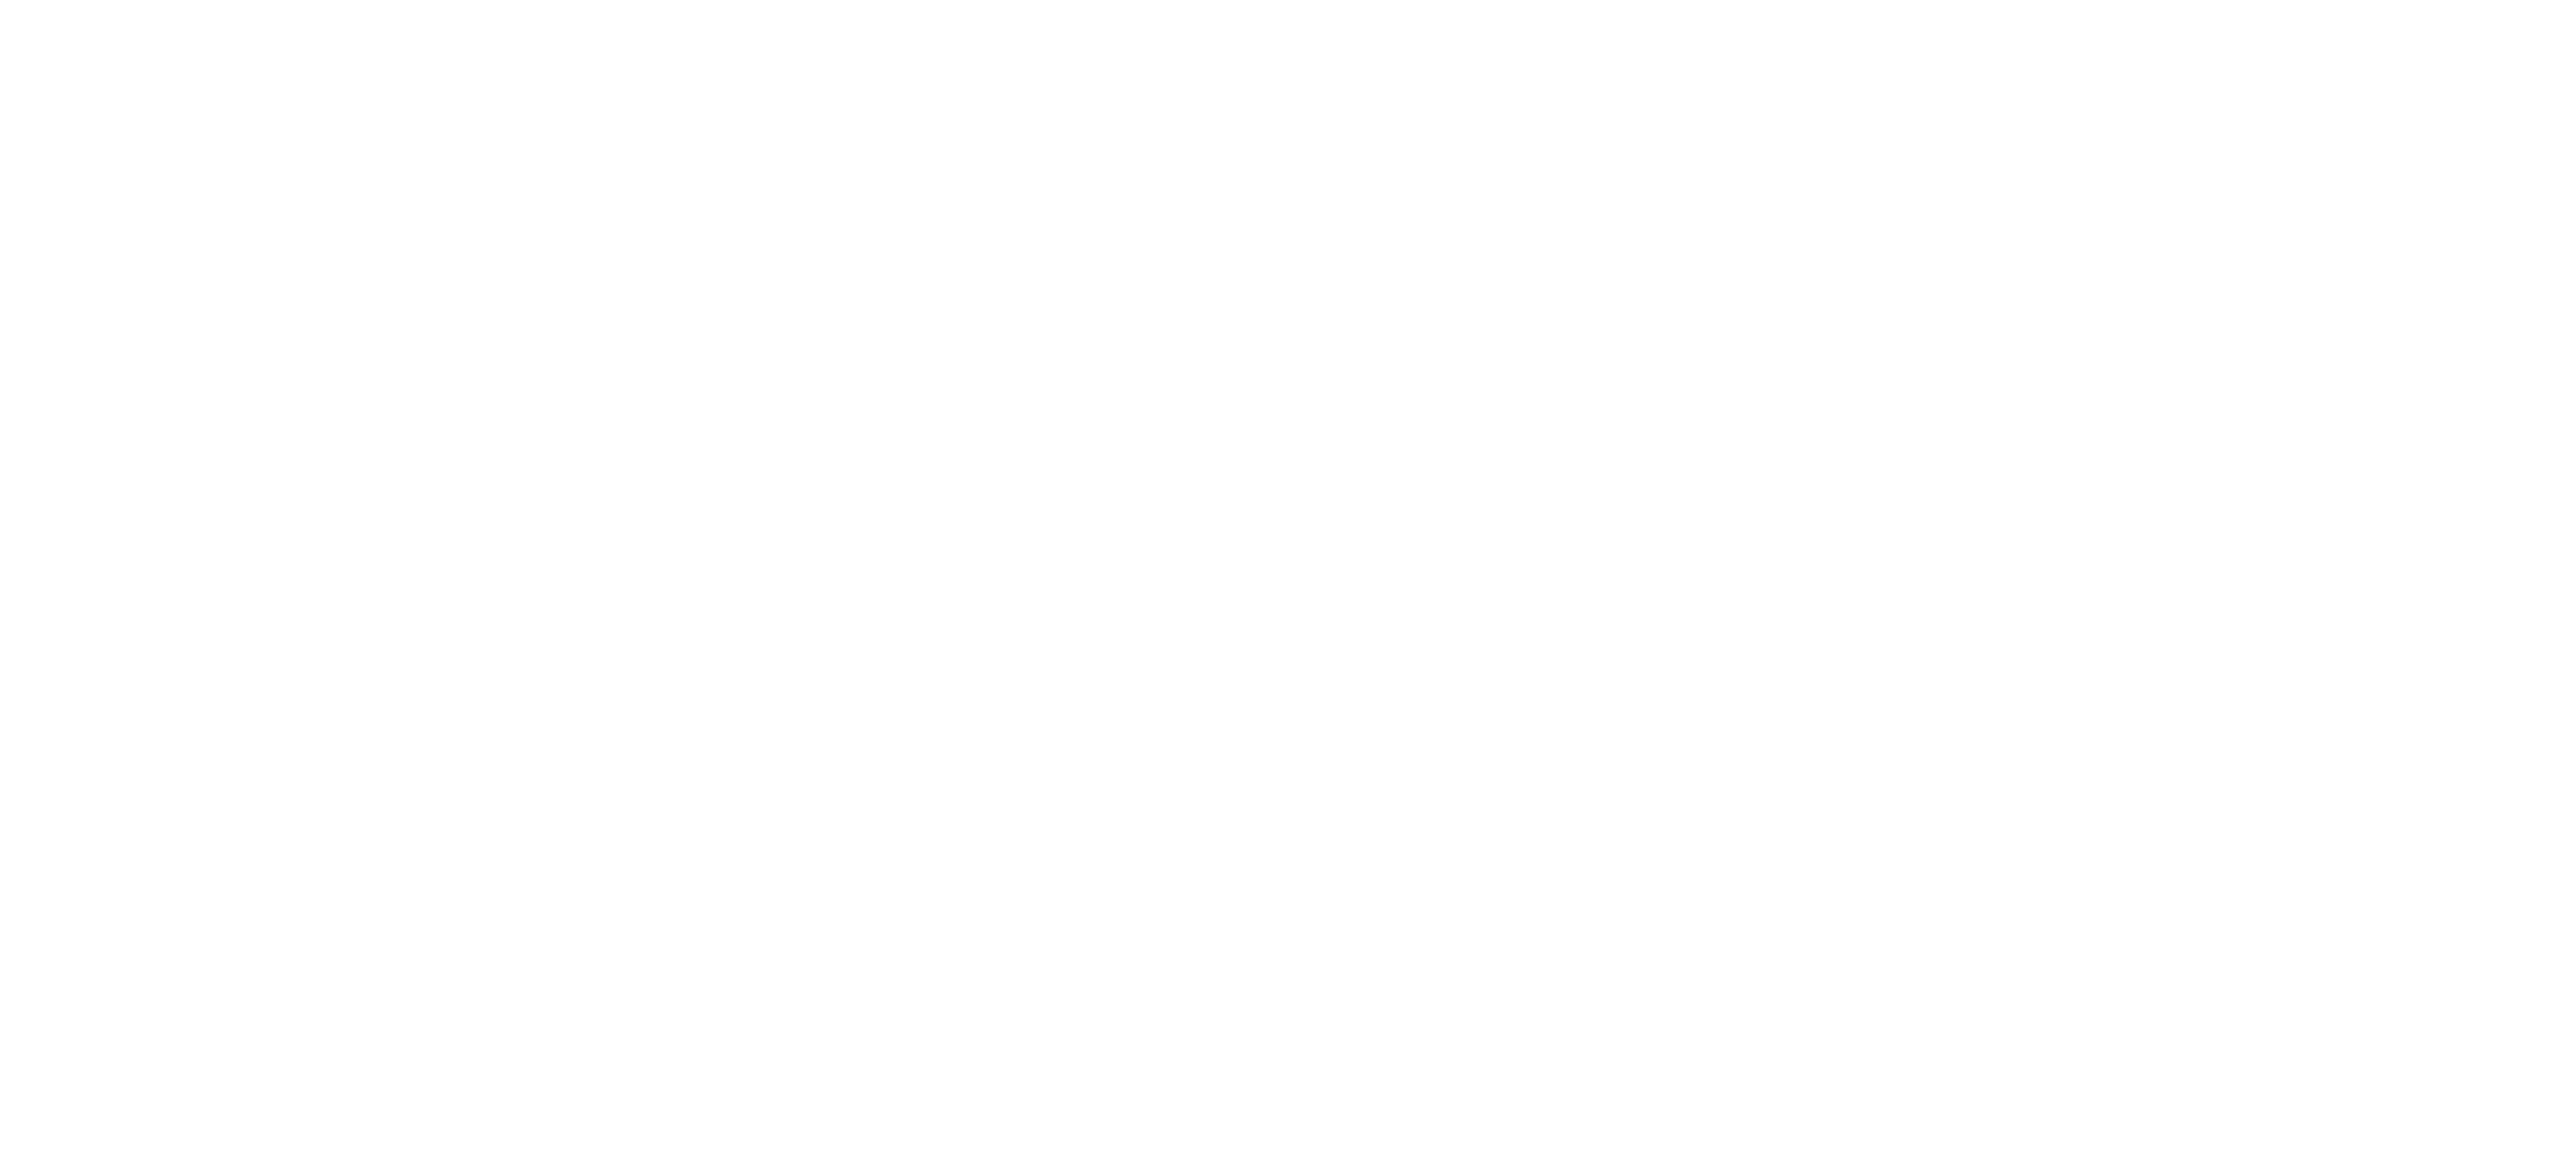 Christmas in Evergreen: Bells Are Ringing logo